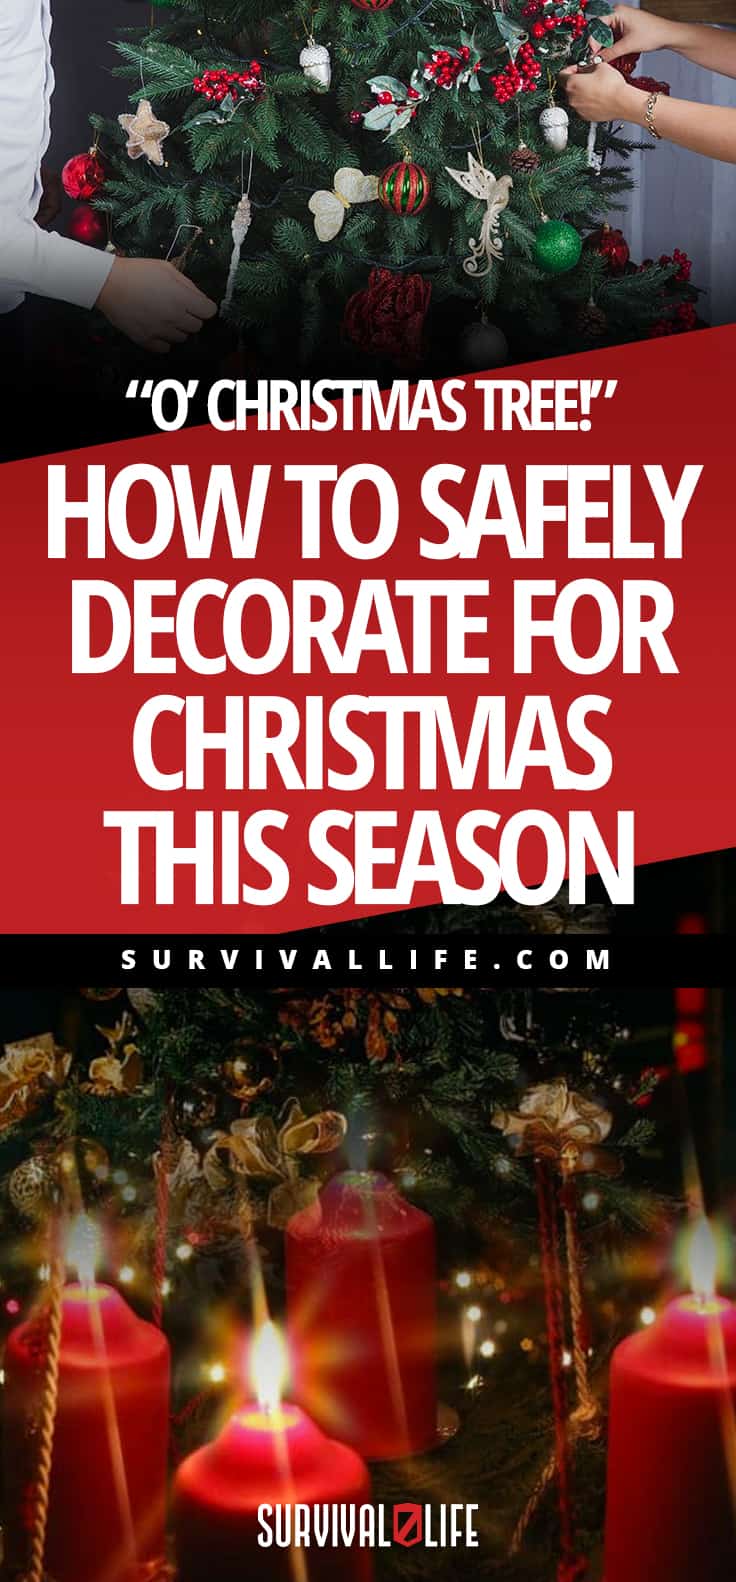 “O’ Christmas Tree!" | How to Safely Decorate For Christmas This Season